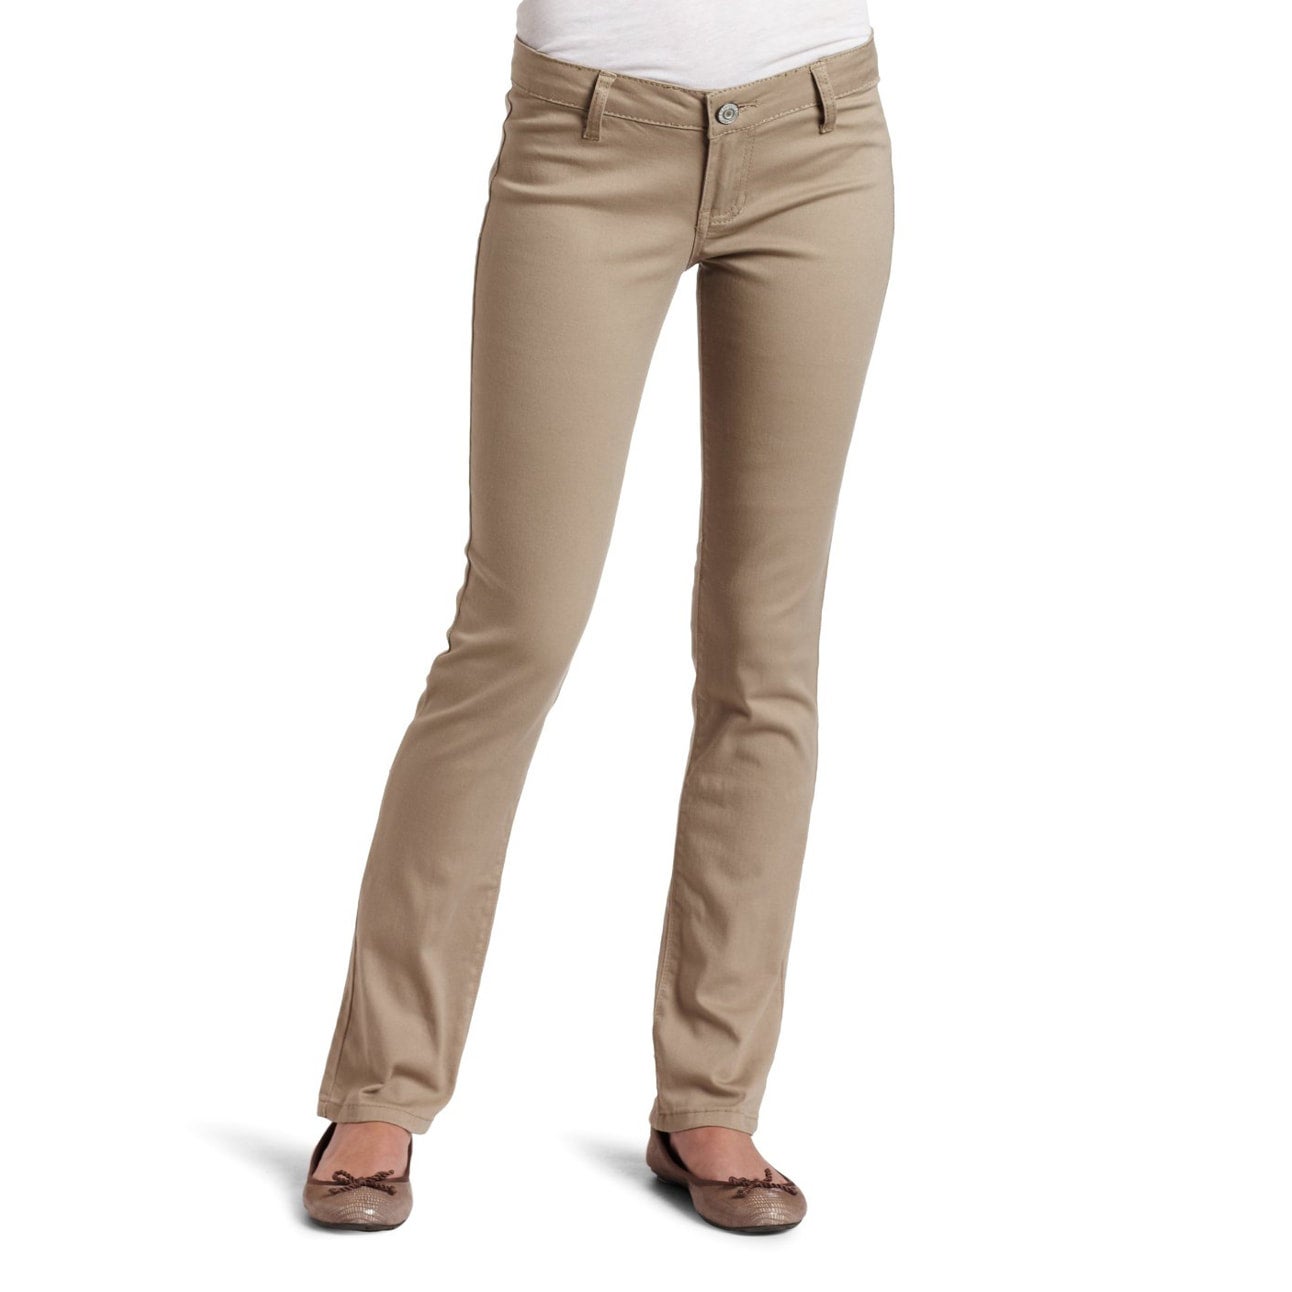 Buy Genuine School Uniform Girls' Twill Pant (More Styles Available),  Classic Khaki, 18 at Amazon.in